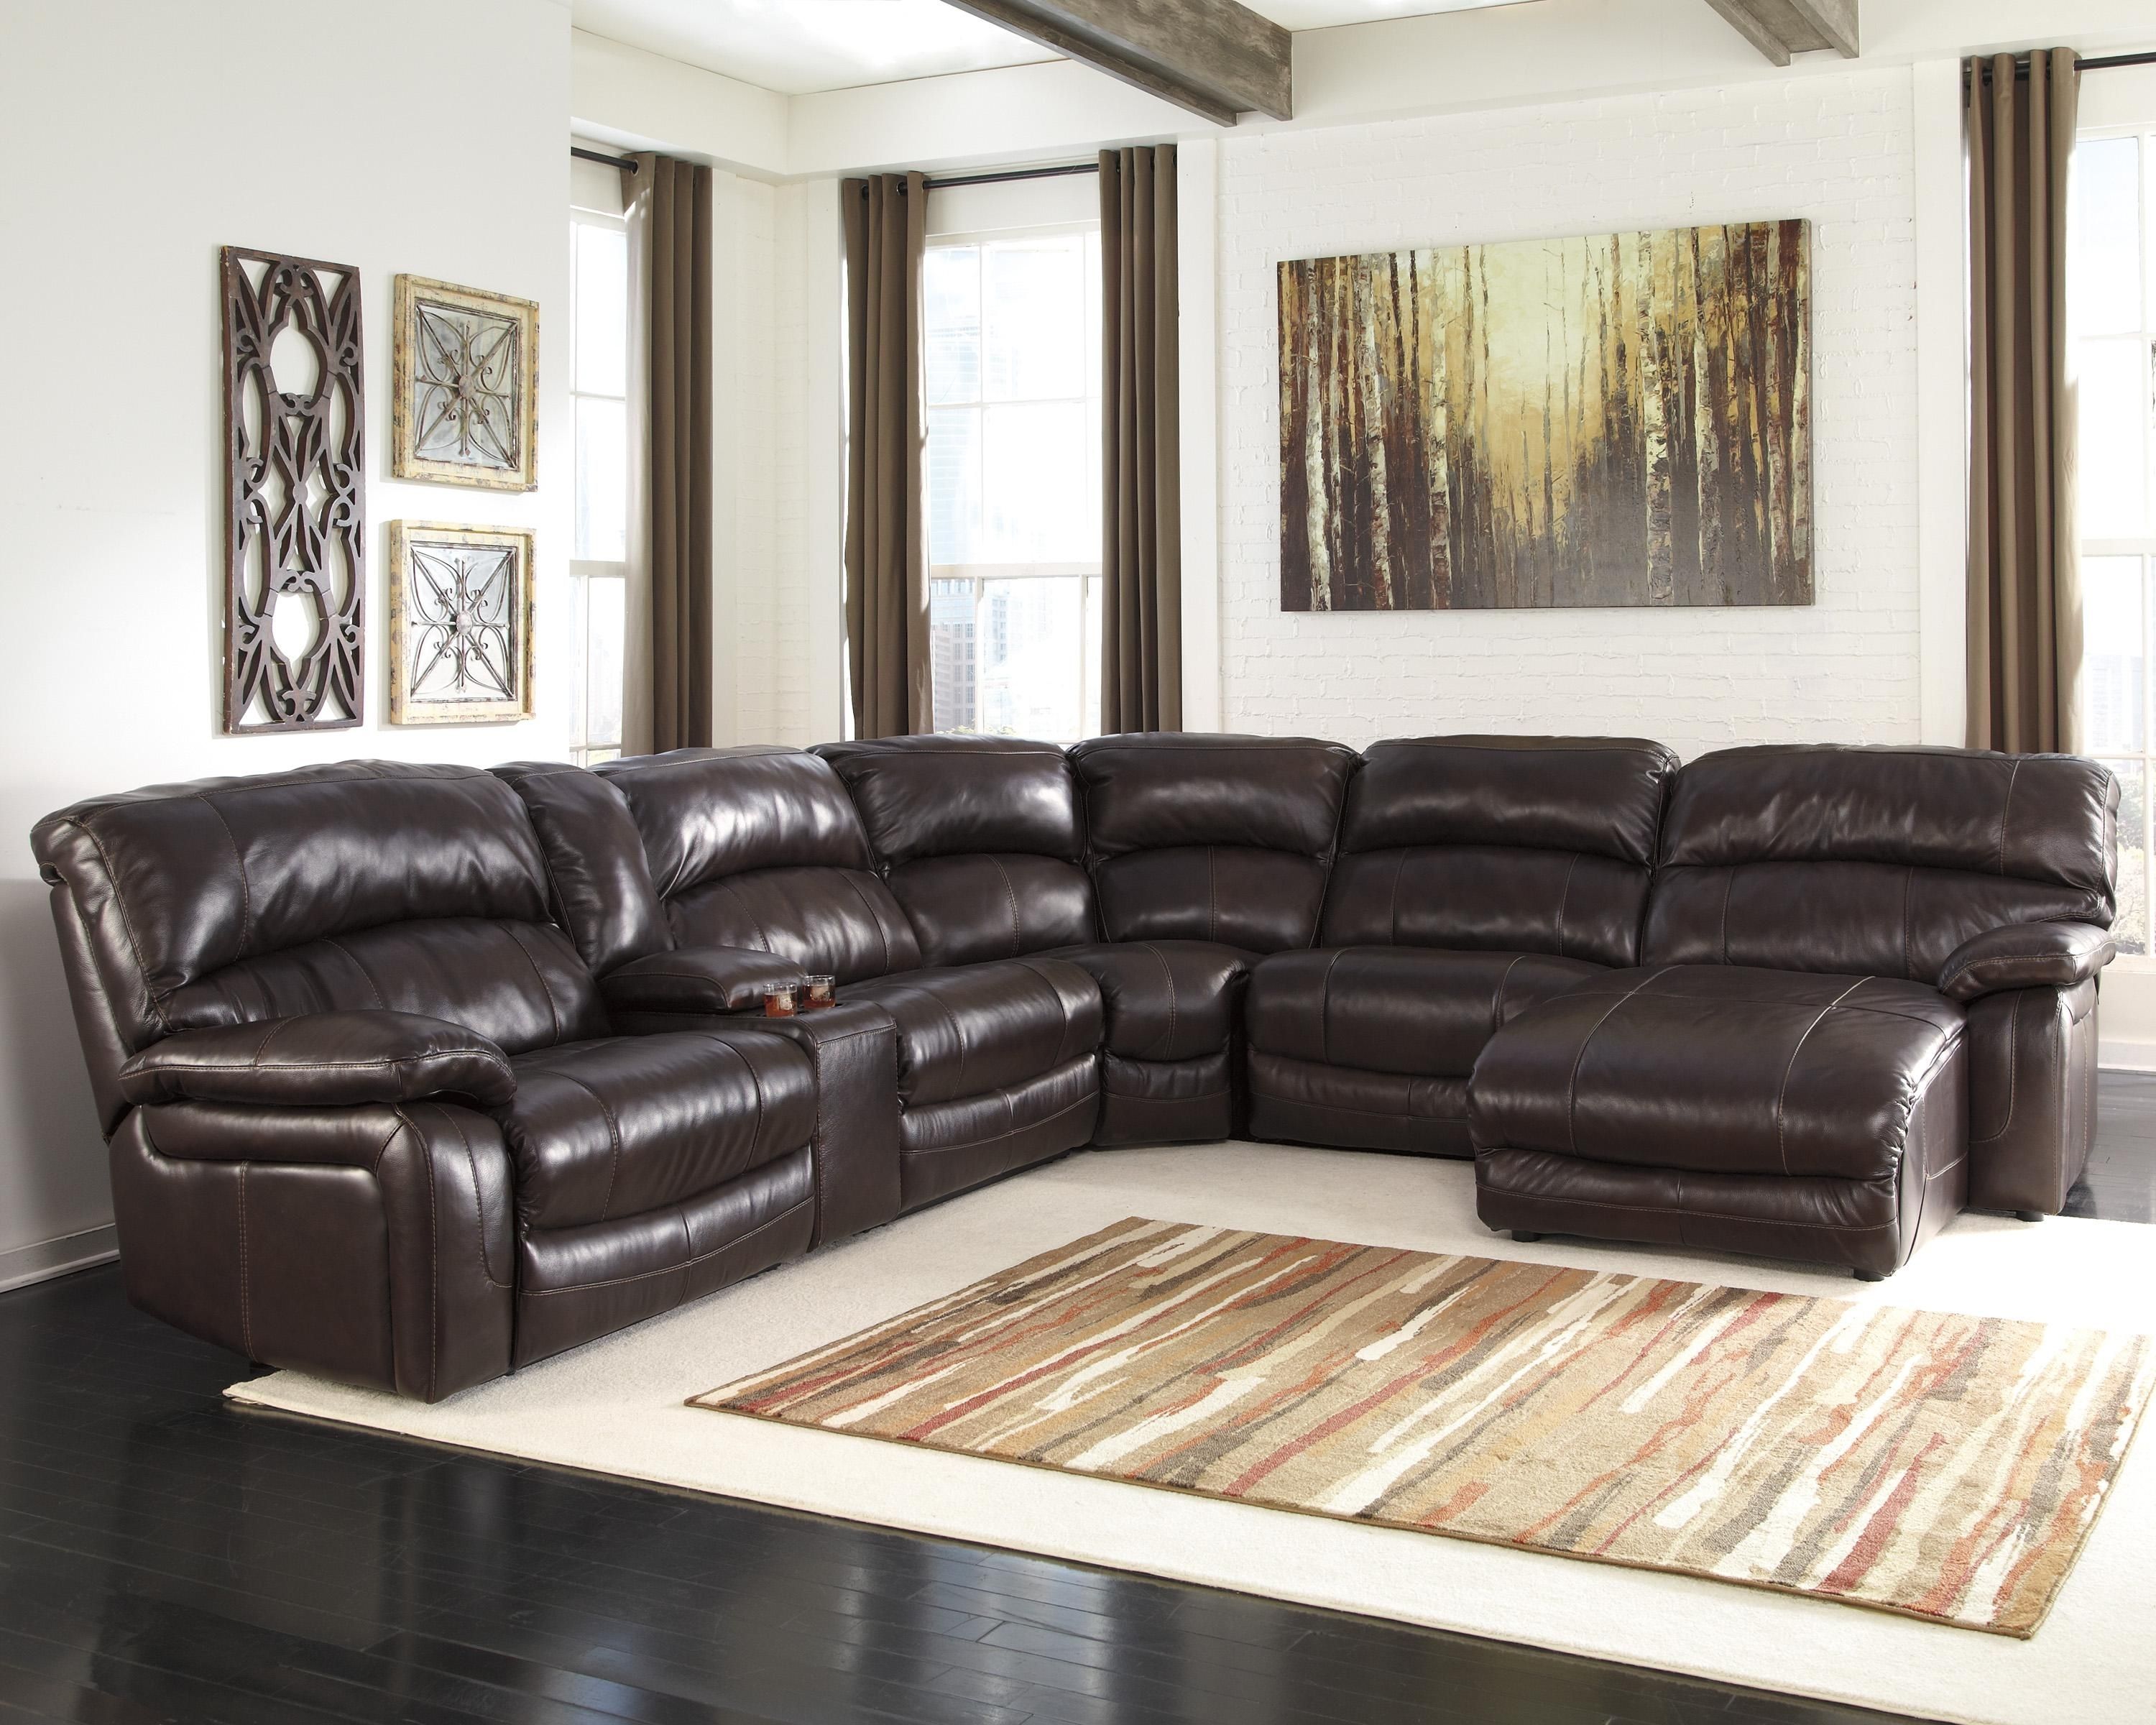 Featured Photo of 10 Best Collection of Murfreesboro Tn Sectional Sofas